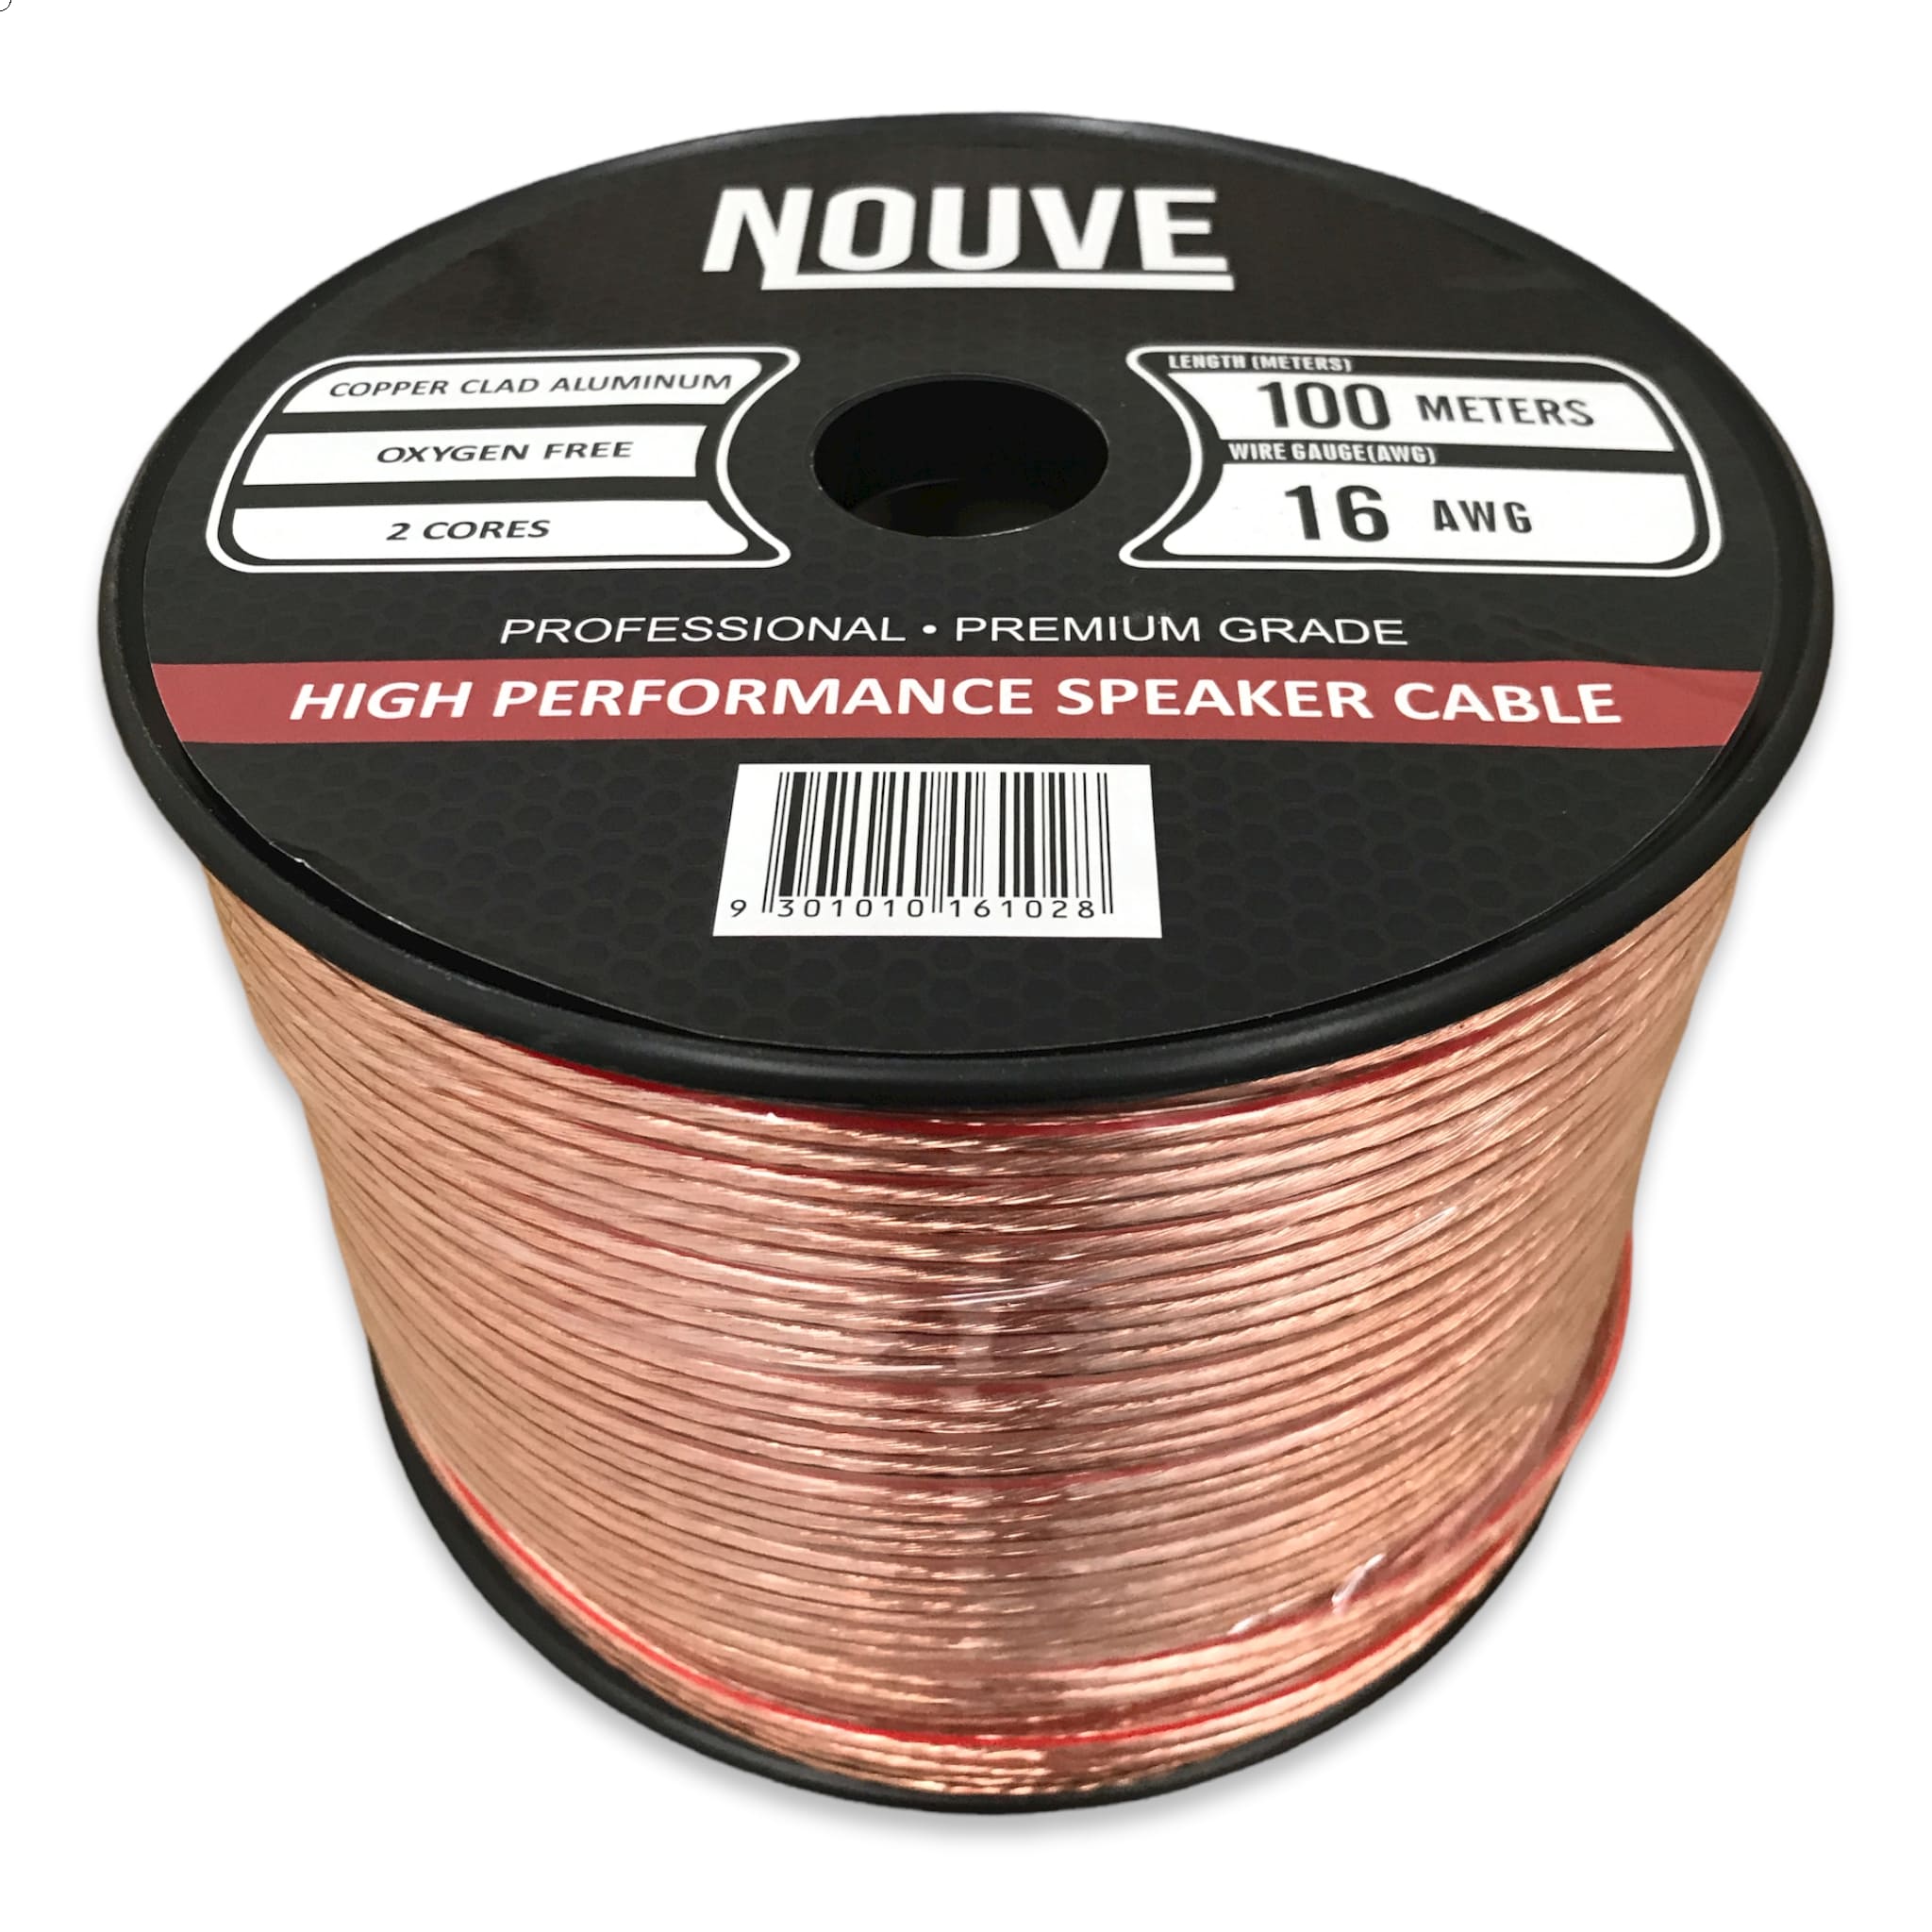 16 awg speaker cable 100m cca